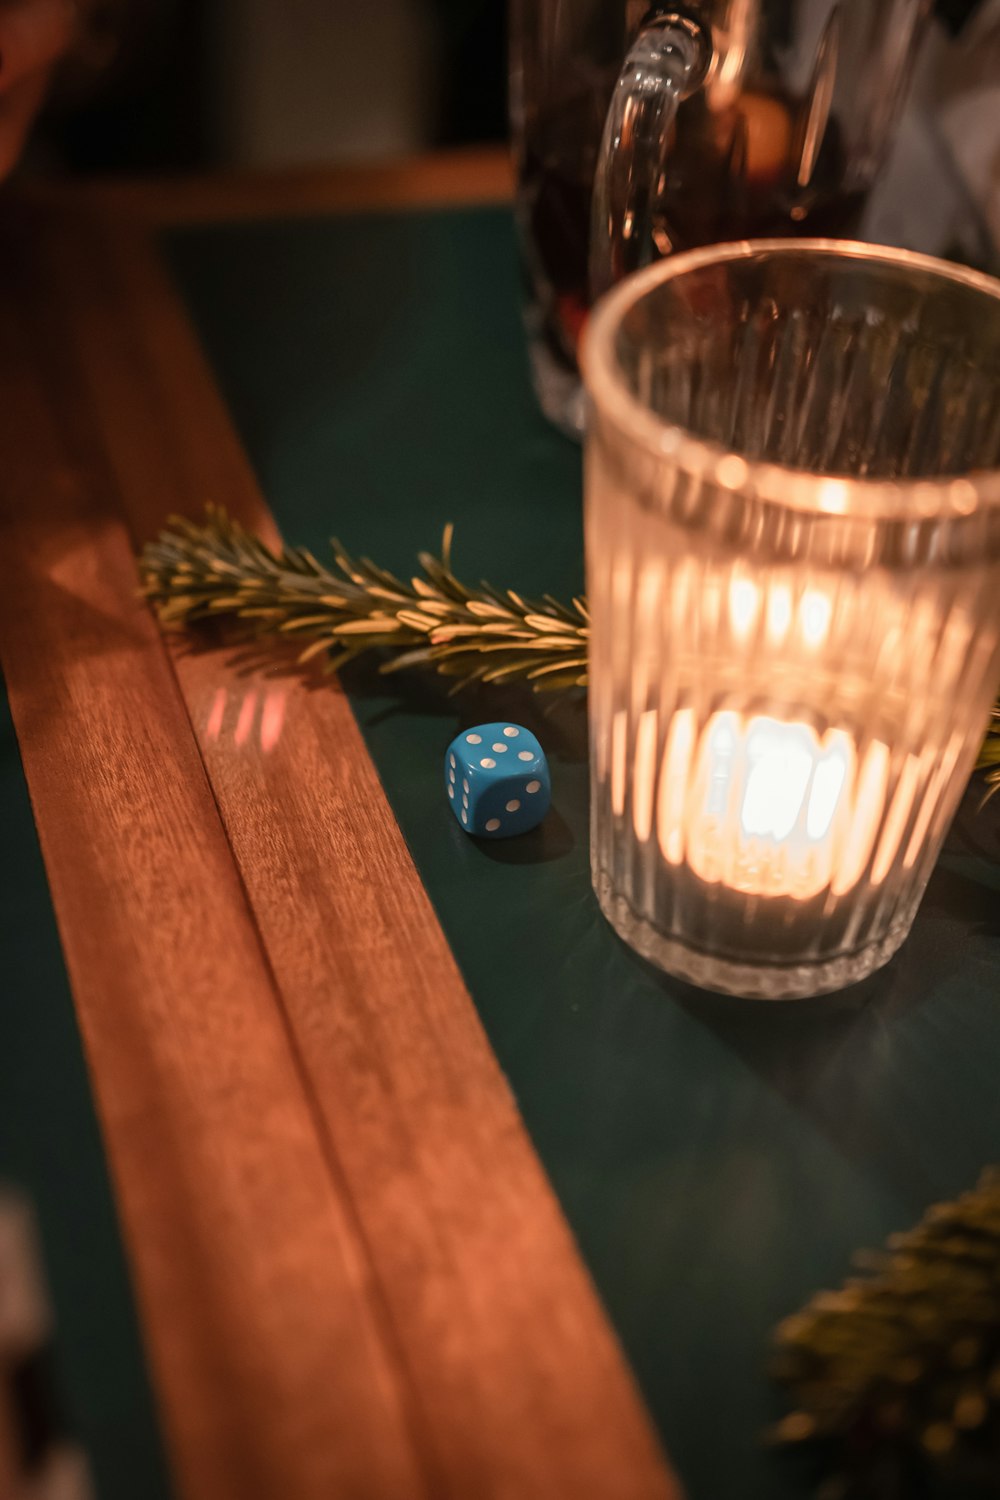 a glass of water and a dice on a table